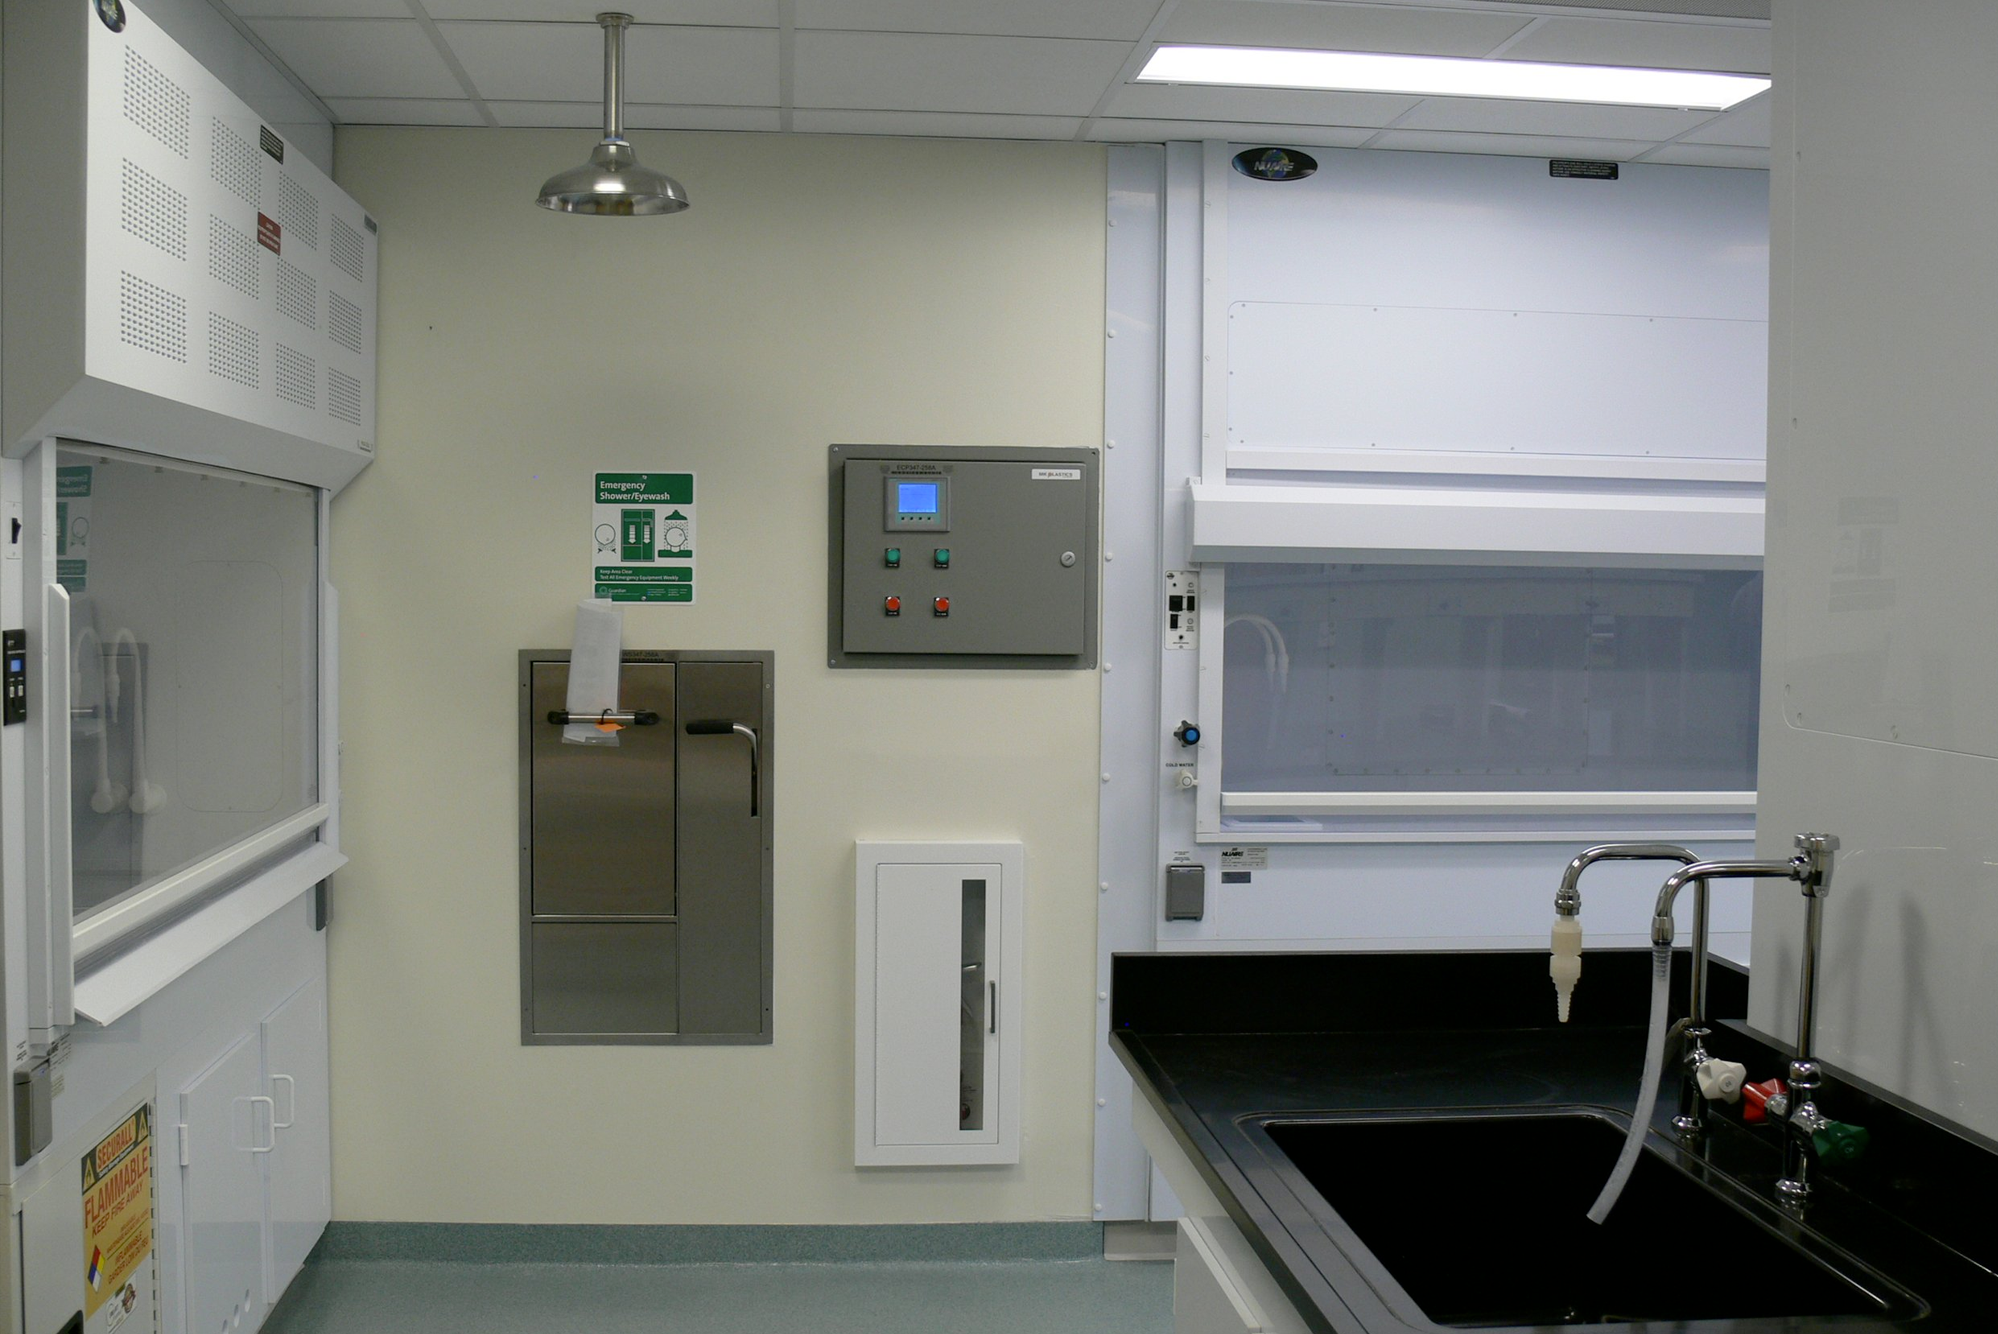 Interior, Morrill Trace Metals Research Laboratory at UMass Amherst, fume hoods, work stations, equipment